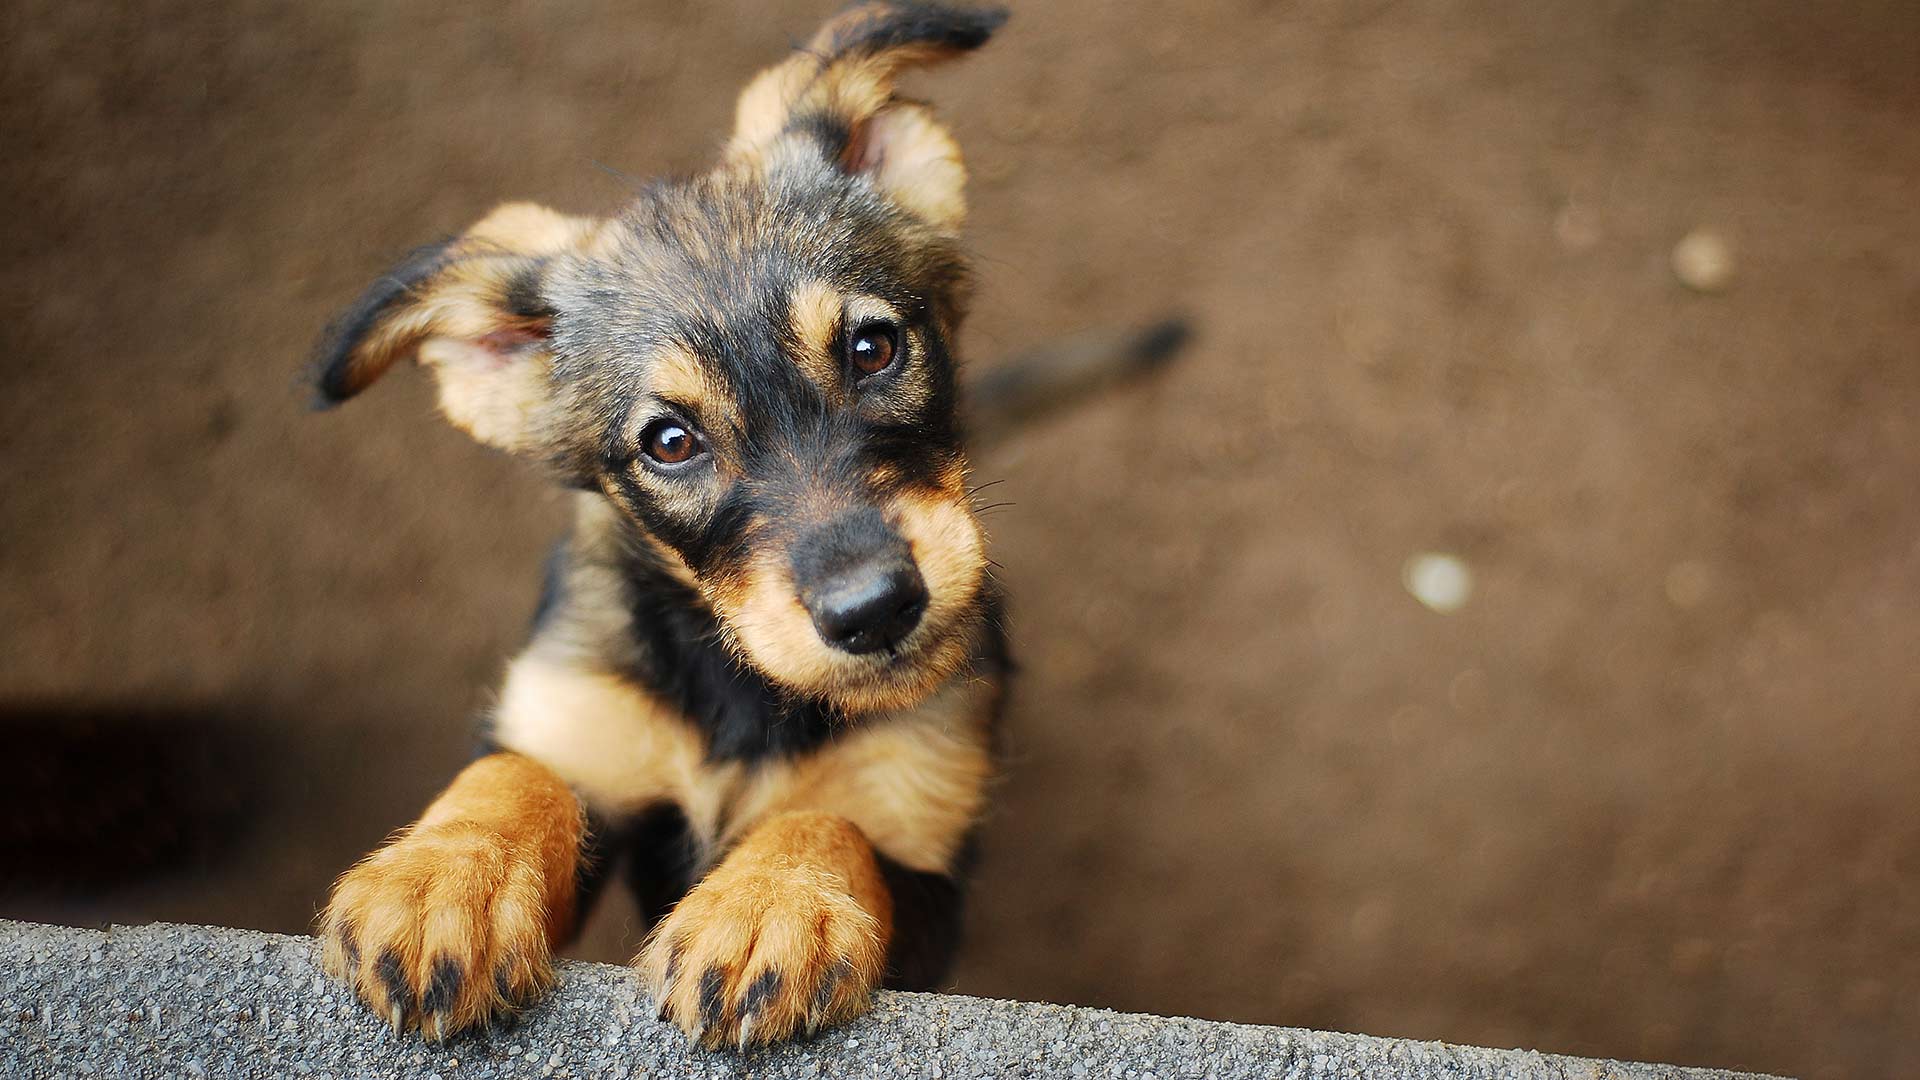 Puppy looking up at the camera